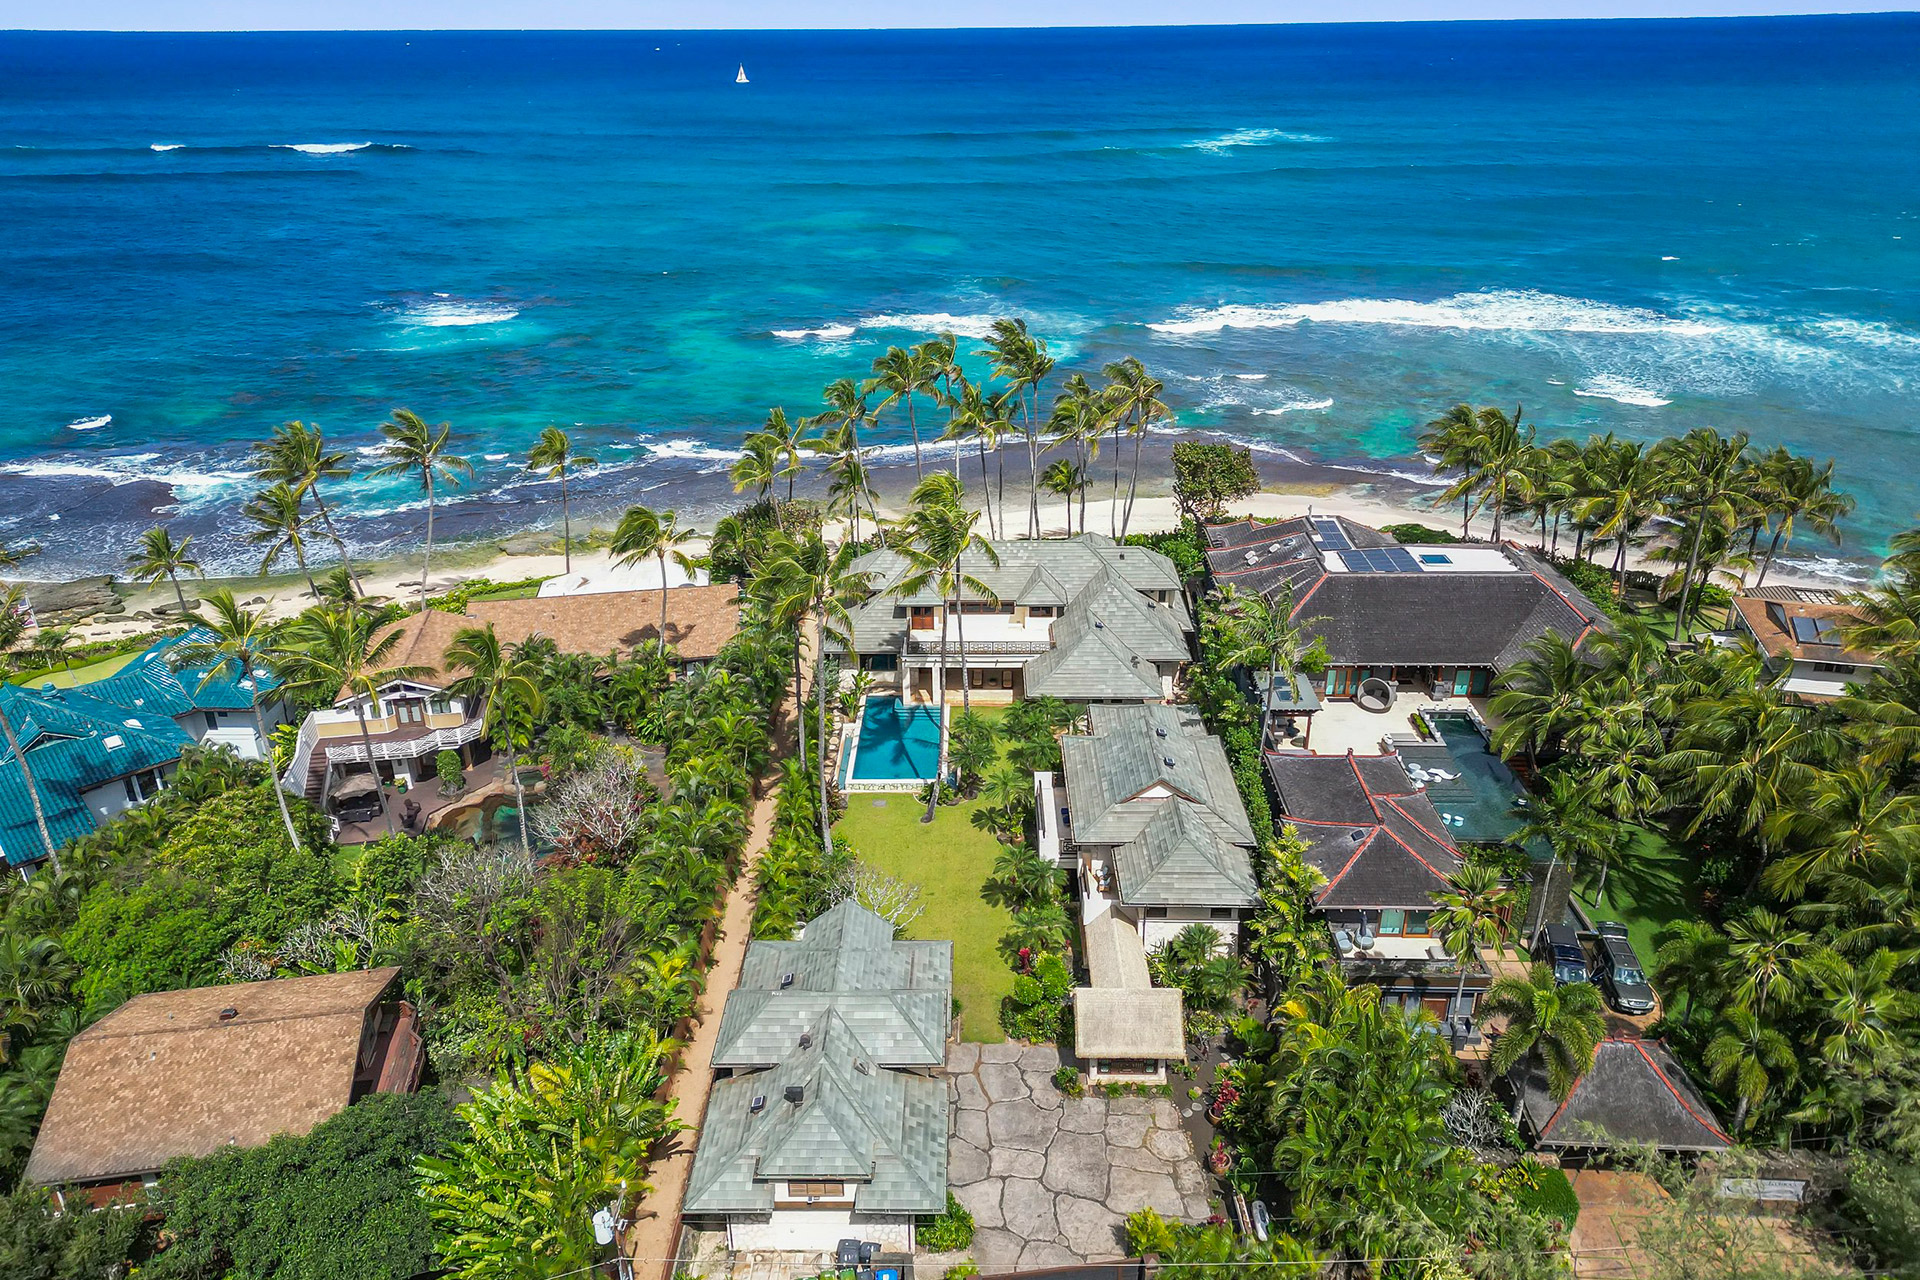 Kelly Slater’s Hawaiian Compound | Uncrate, #Kelly #Slaters #Hawaiian #Compound #Uncrate